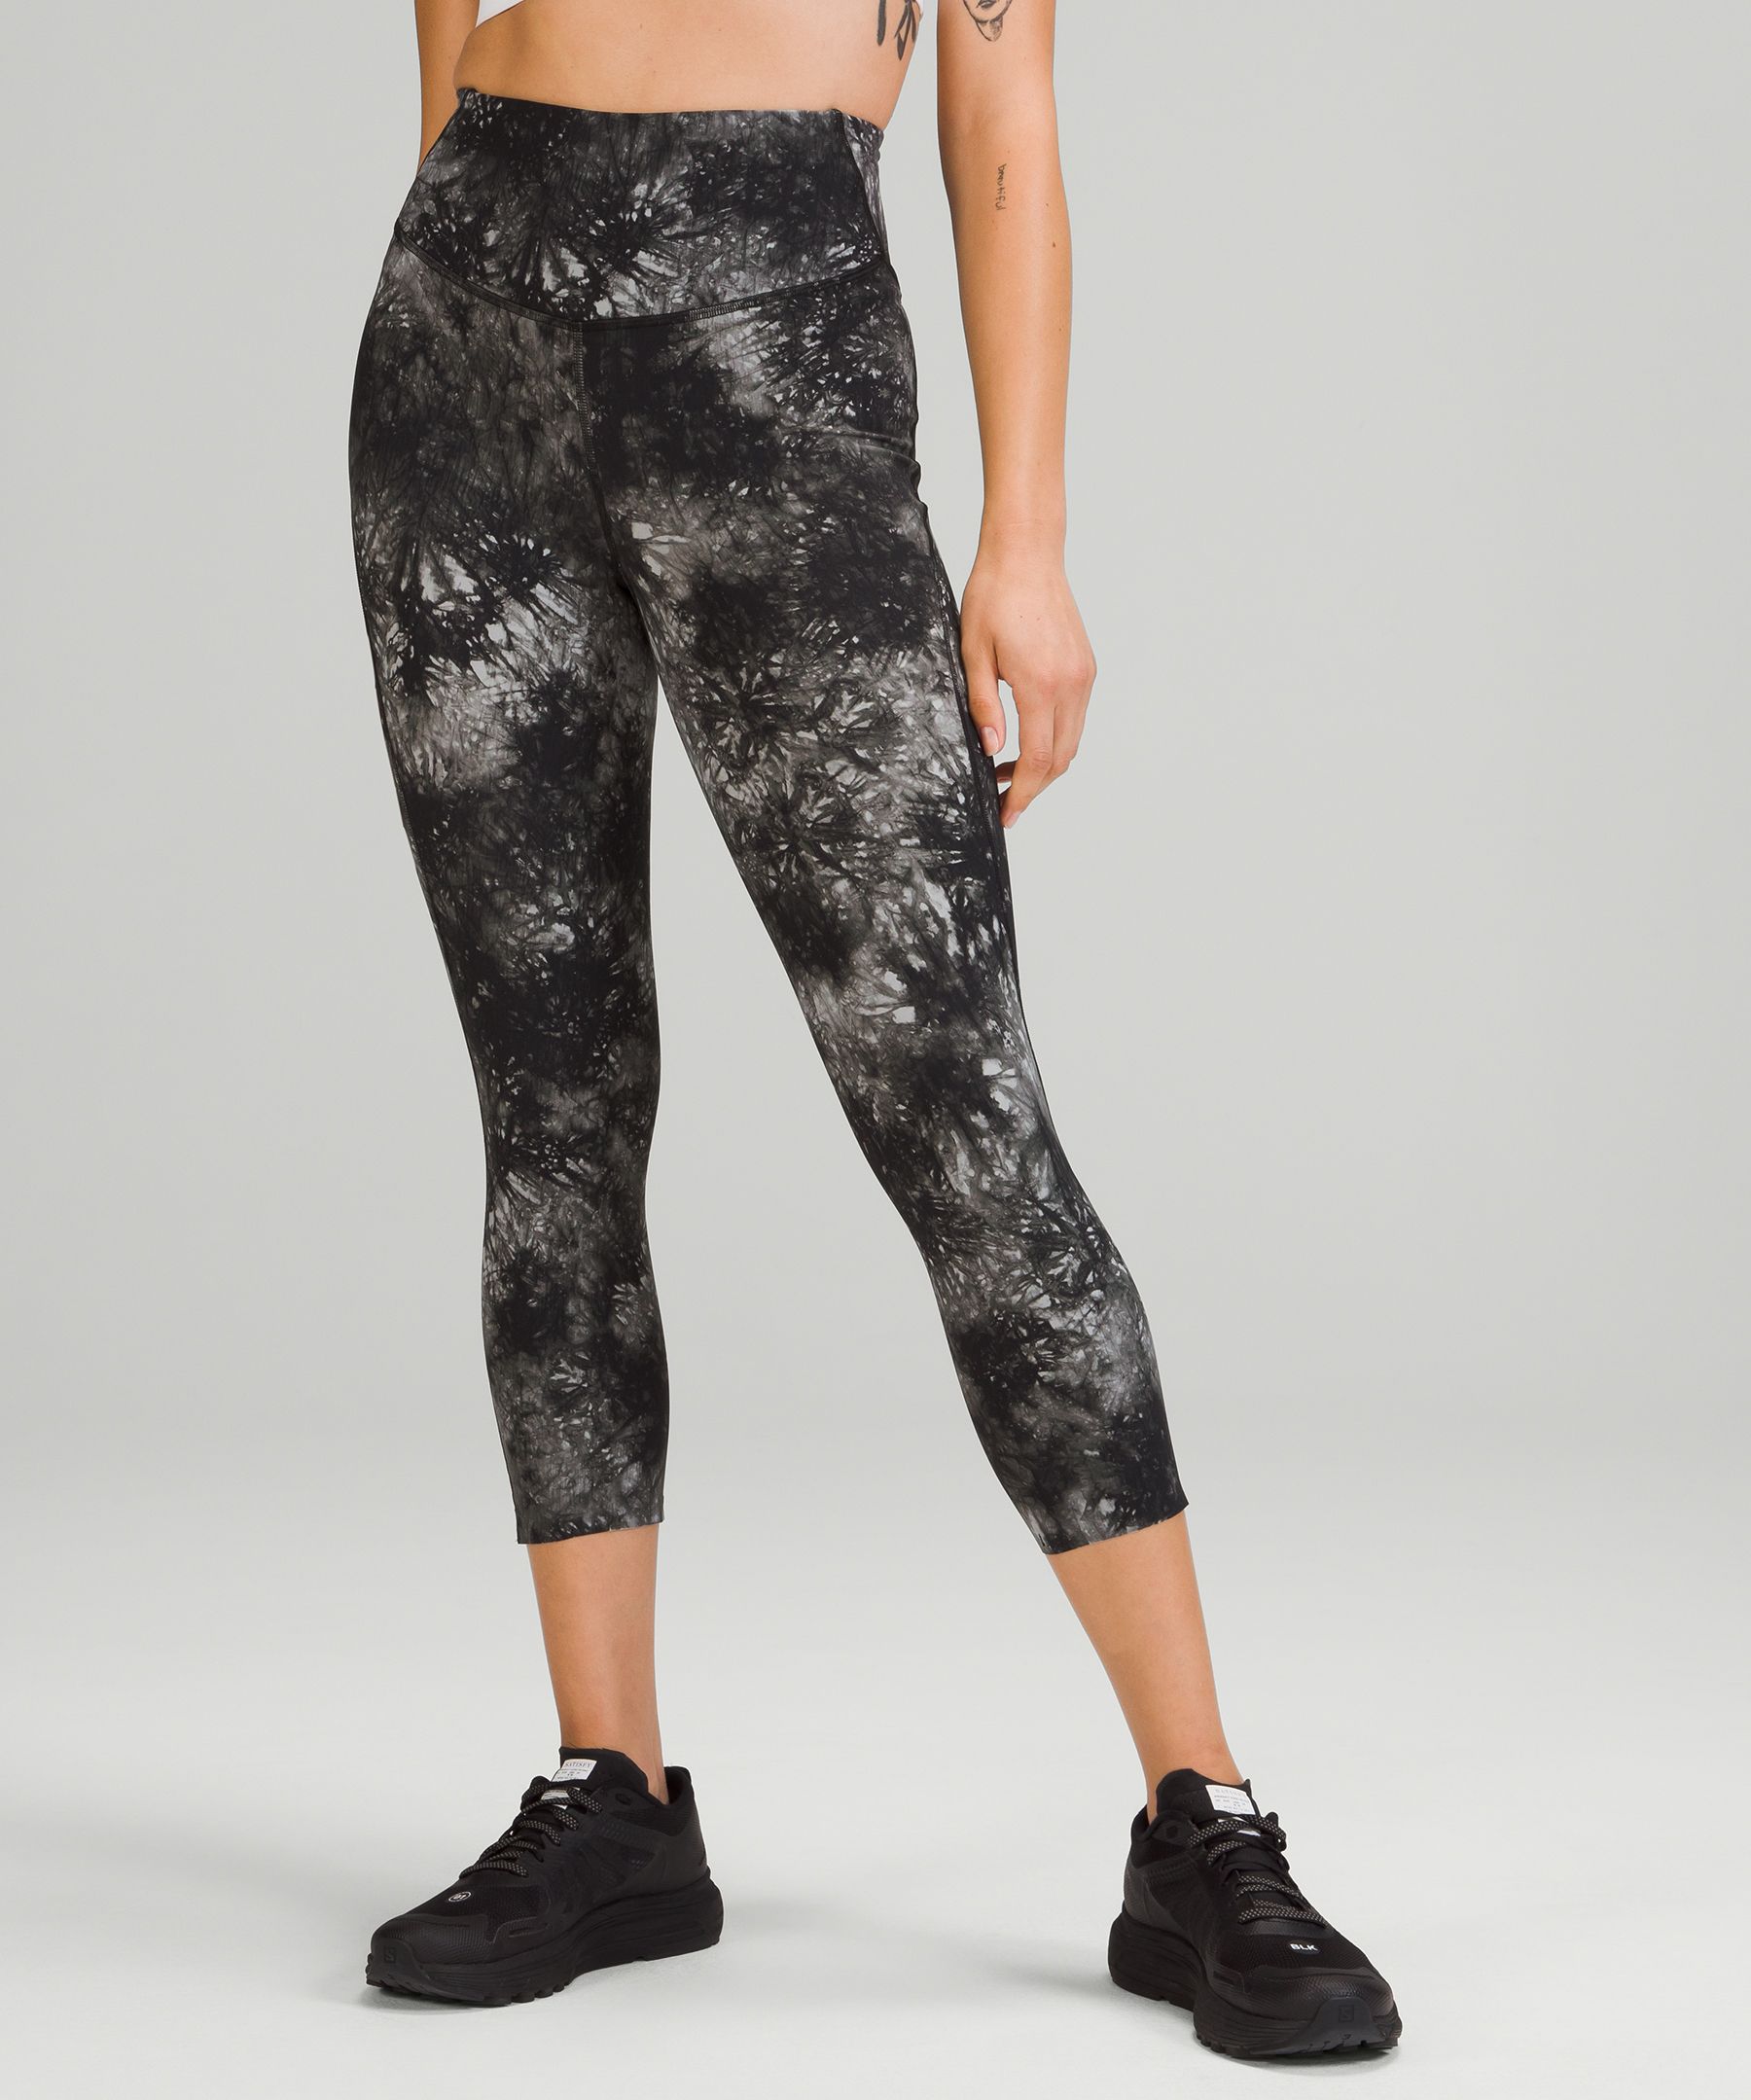 In Store Try-Ons: Pace Base Tights Black, All Yours Cropped Hoodie